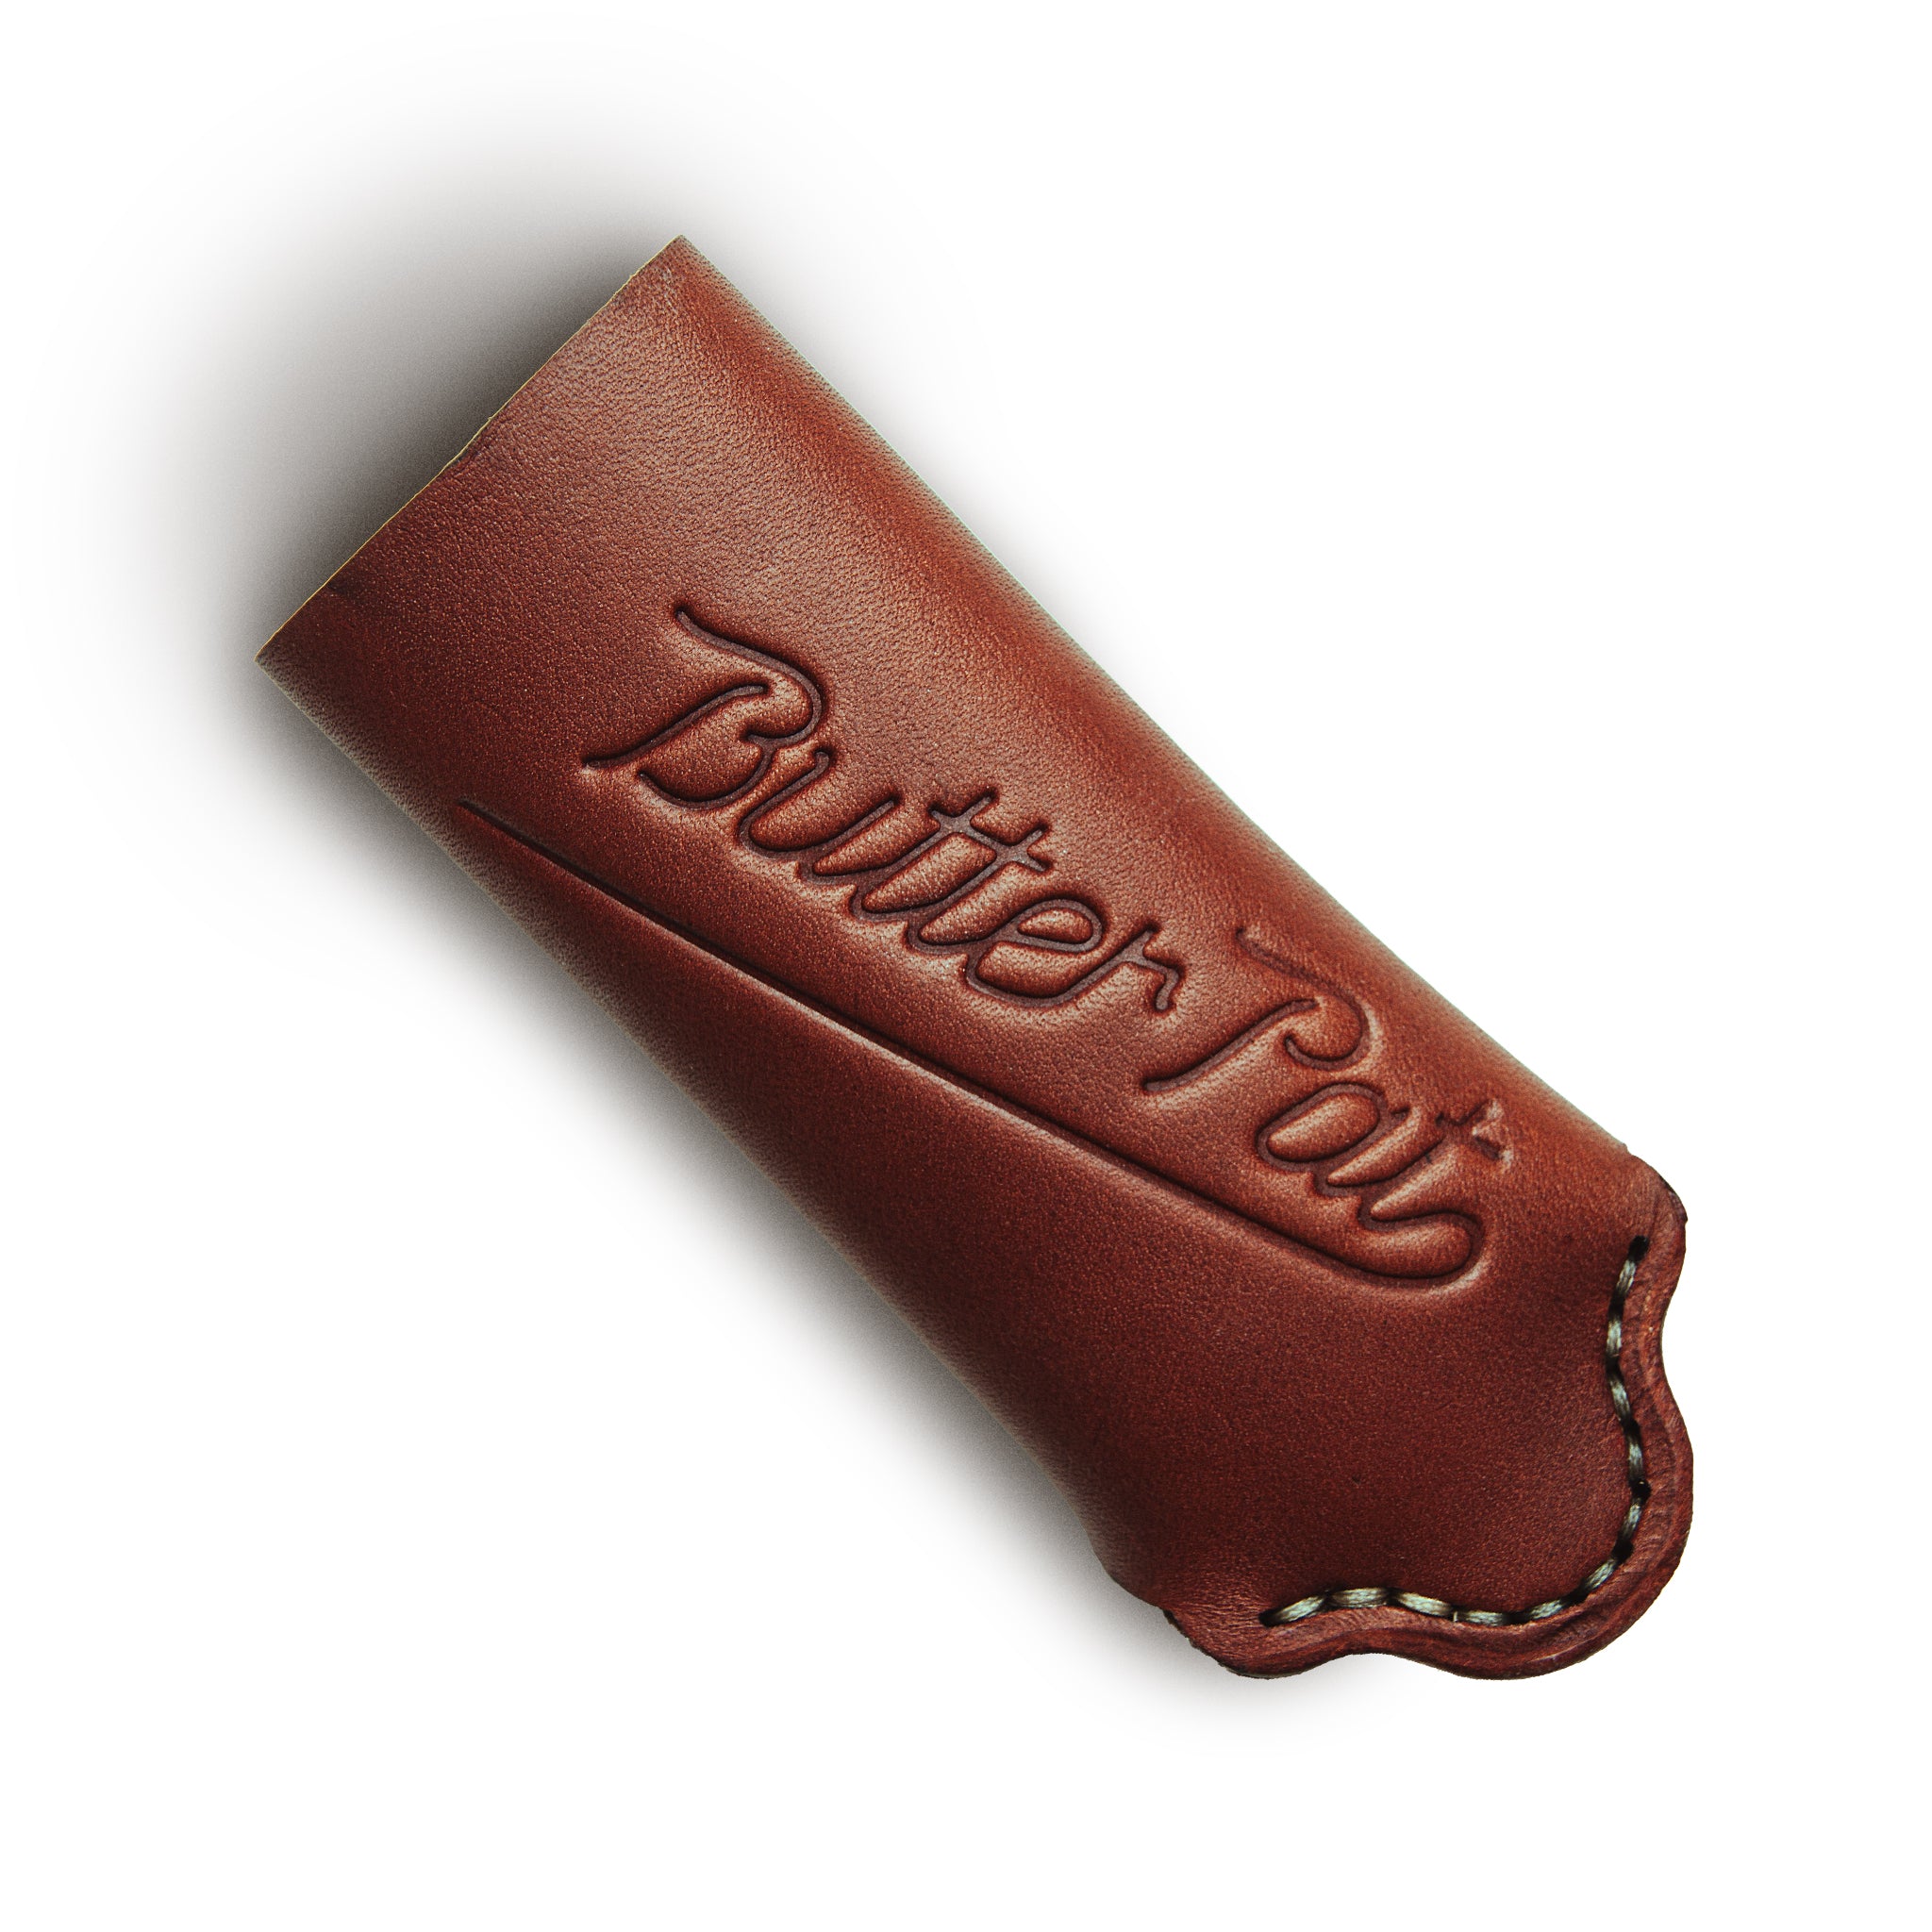 Handle Cover – Butter Pat Industries